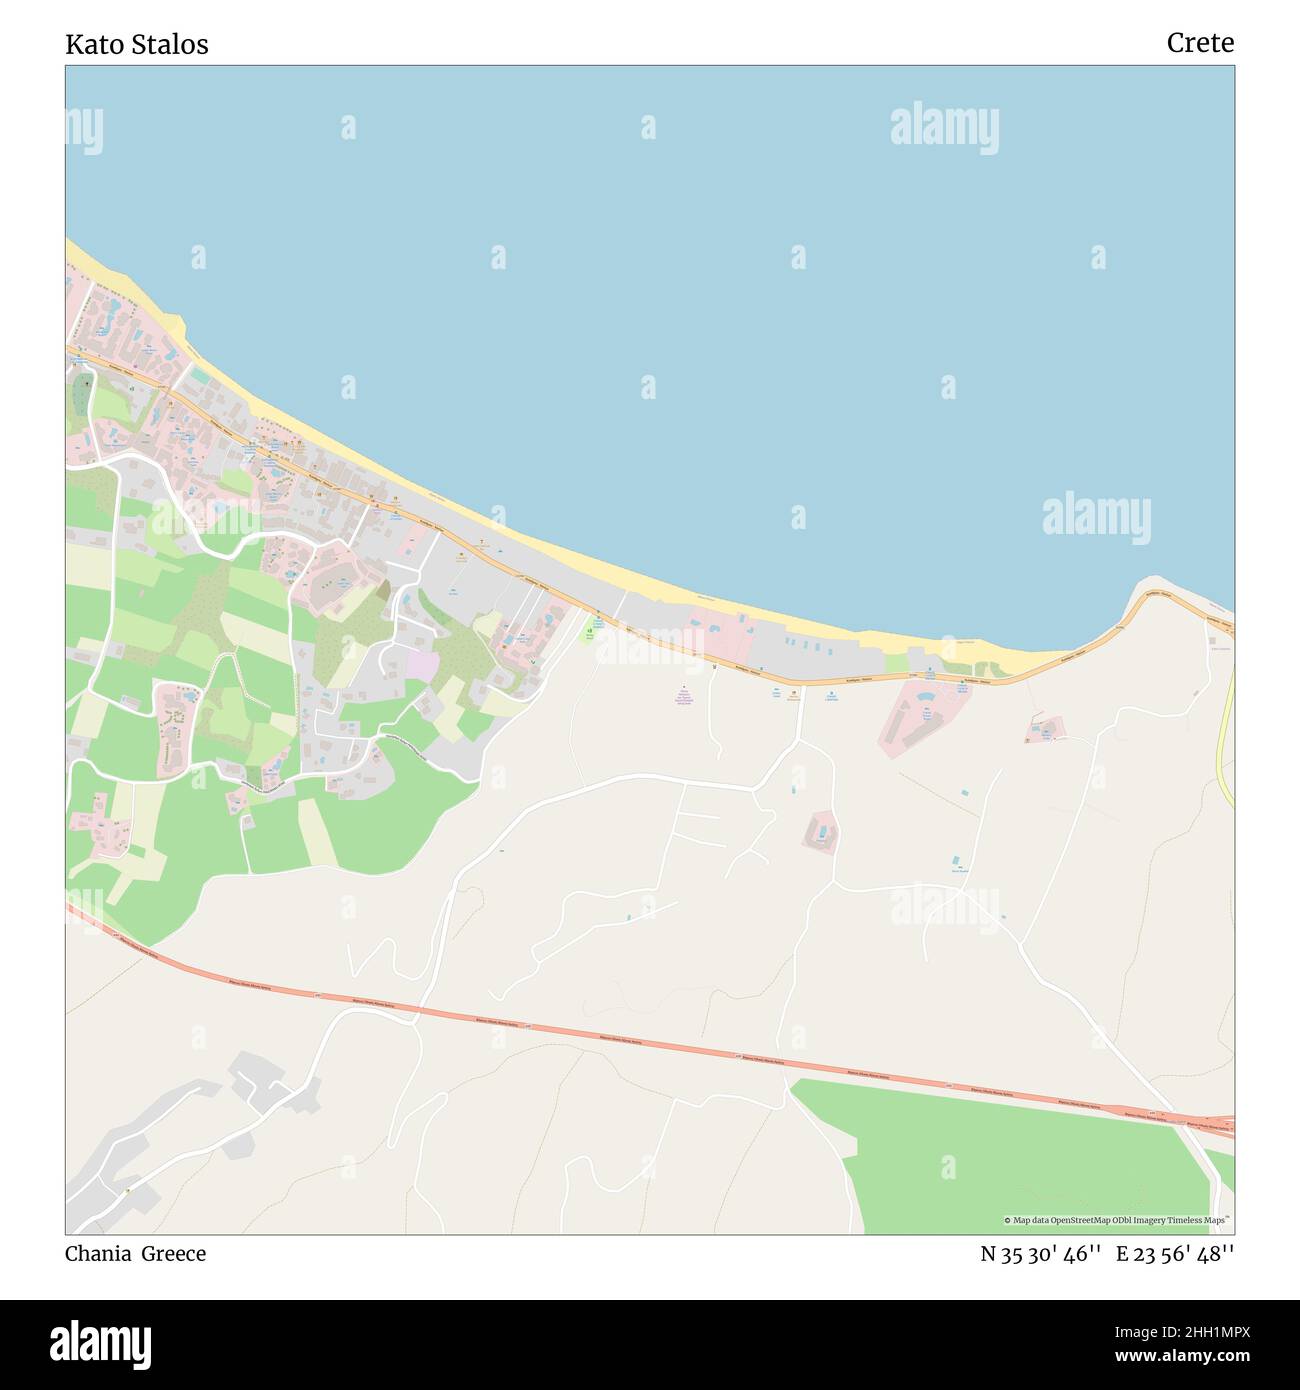 Kato Stalos, Chania, Greece, Crete, N 35 30' 46'', E 23 56' 48'', map, Timeless Map published in 2021. Travelers, explorers and adventurers like Florence Nightingale, David Livingstone, Ernest Shackleton, Lewis and Clark and Sherlock Holmes relied on maps to plan travels to the world's most remote corners, Timeless Maps is mapping most locations on the globe, showing the achievement of great dreams Stock Photo